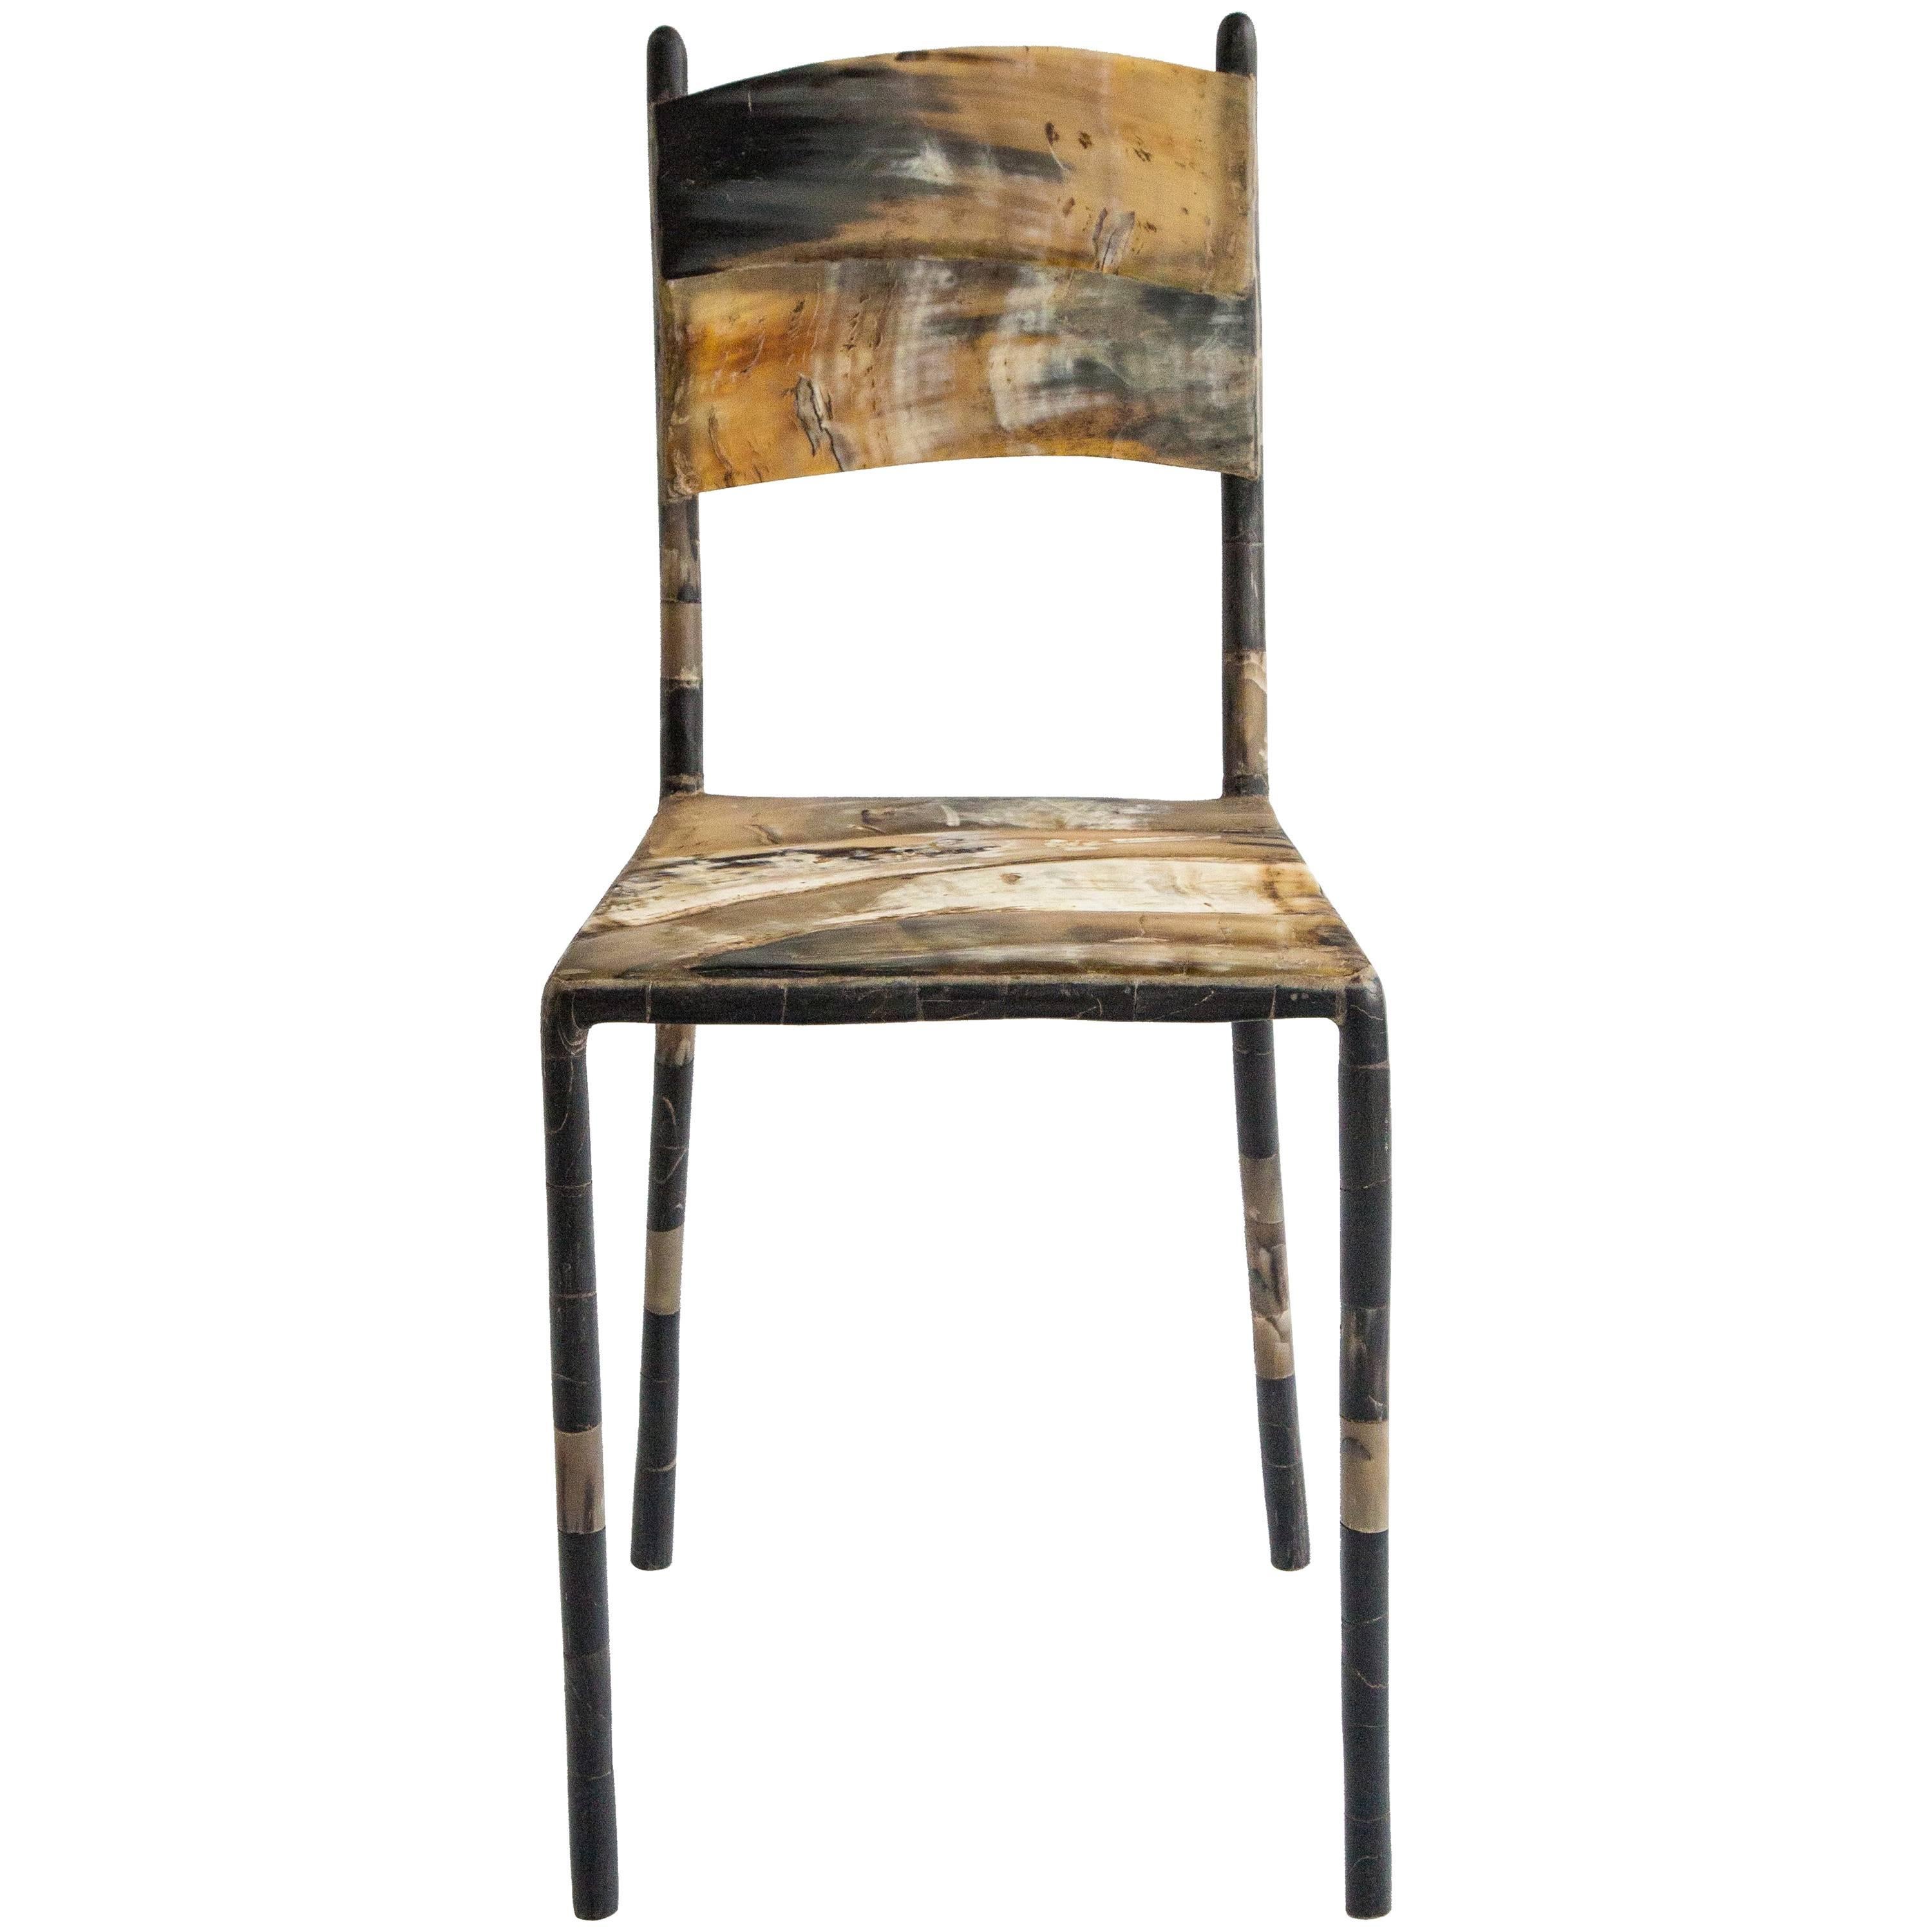 Contemporary Horn Chair by Balla N'iang, 2018 For Sale